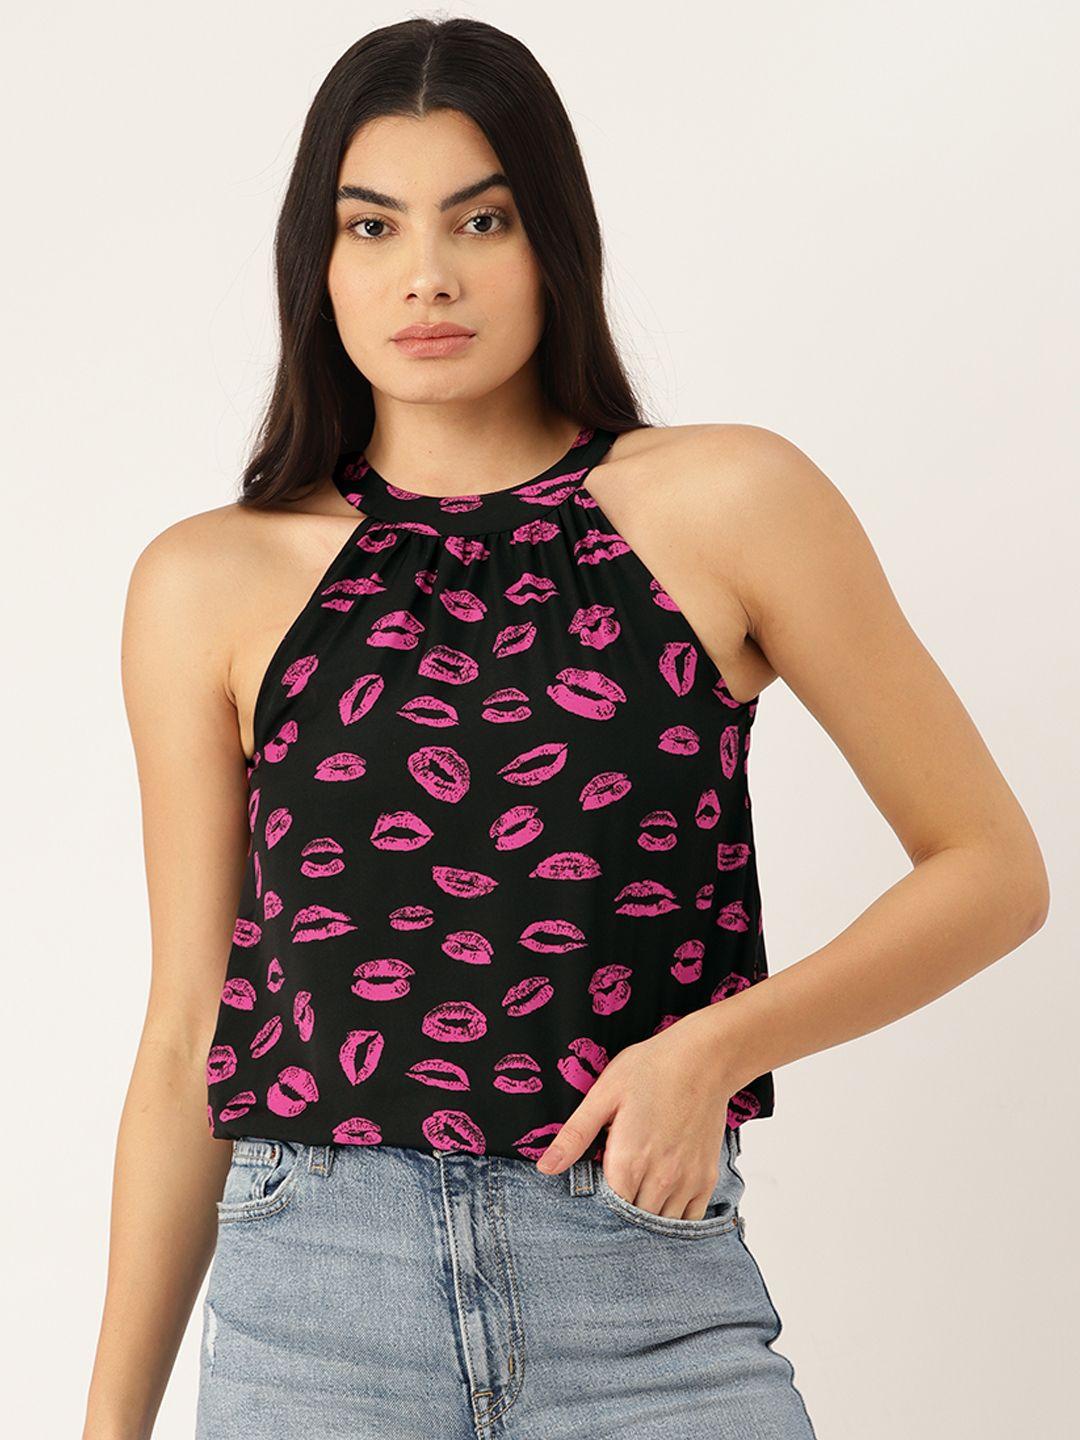 forever 21 conversational print top